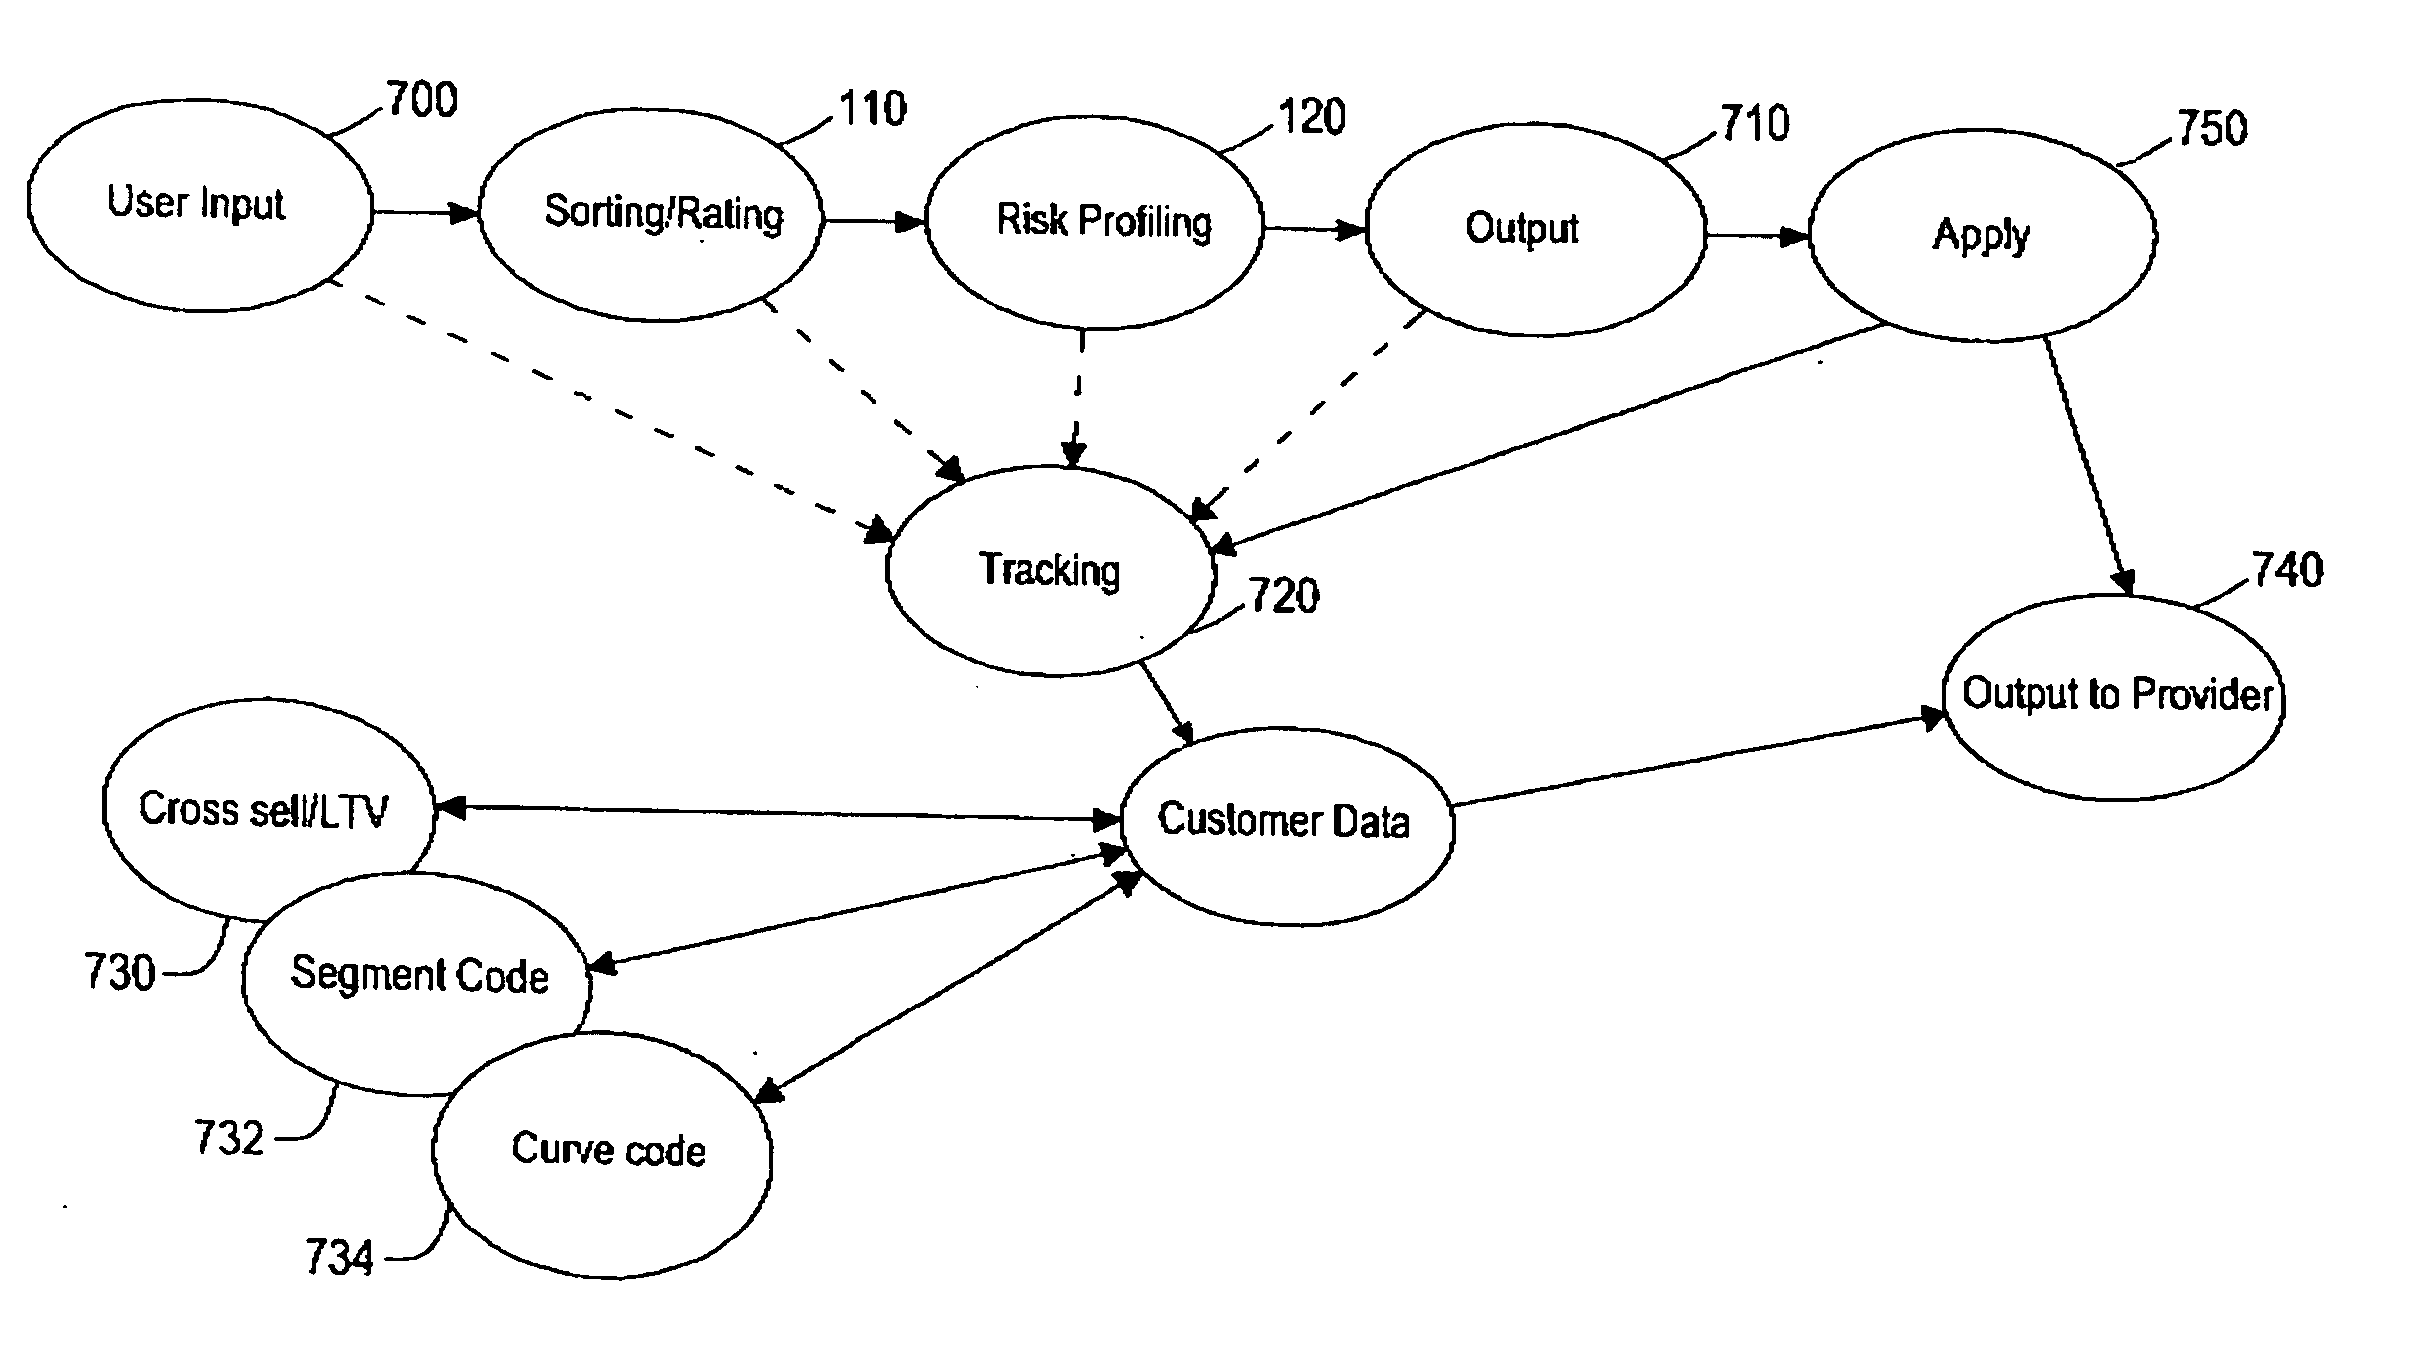 Information system with propensity modelling and profiling engine